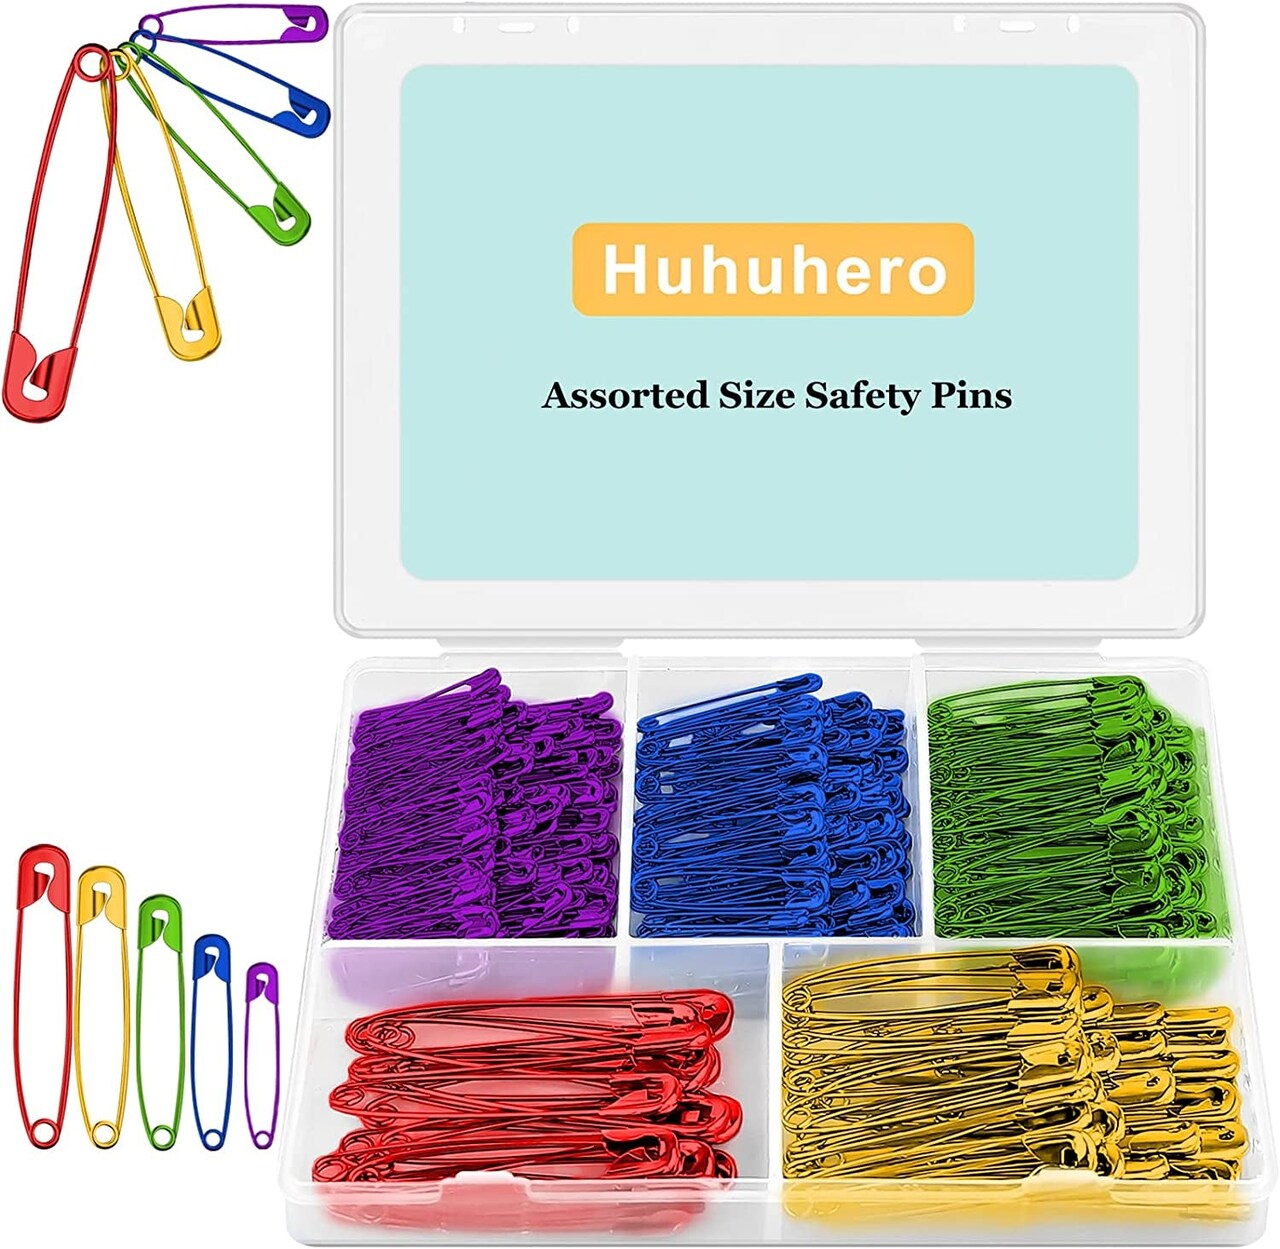 Safety Pins Assorted, 340-Pack 5 Different Sizes Large Safety Pins Heavy  Duty Safety Pin, Safety Pins for Clothes Pins, Small Safety Pins for  Sewing, Halloween Costume, Arts and Crafts Supplies